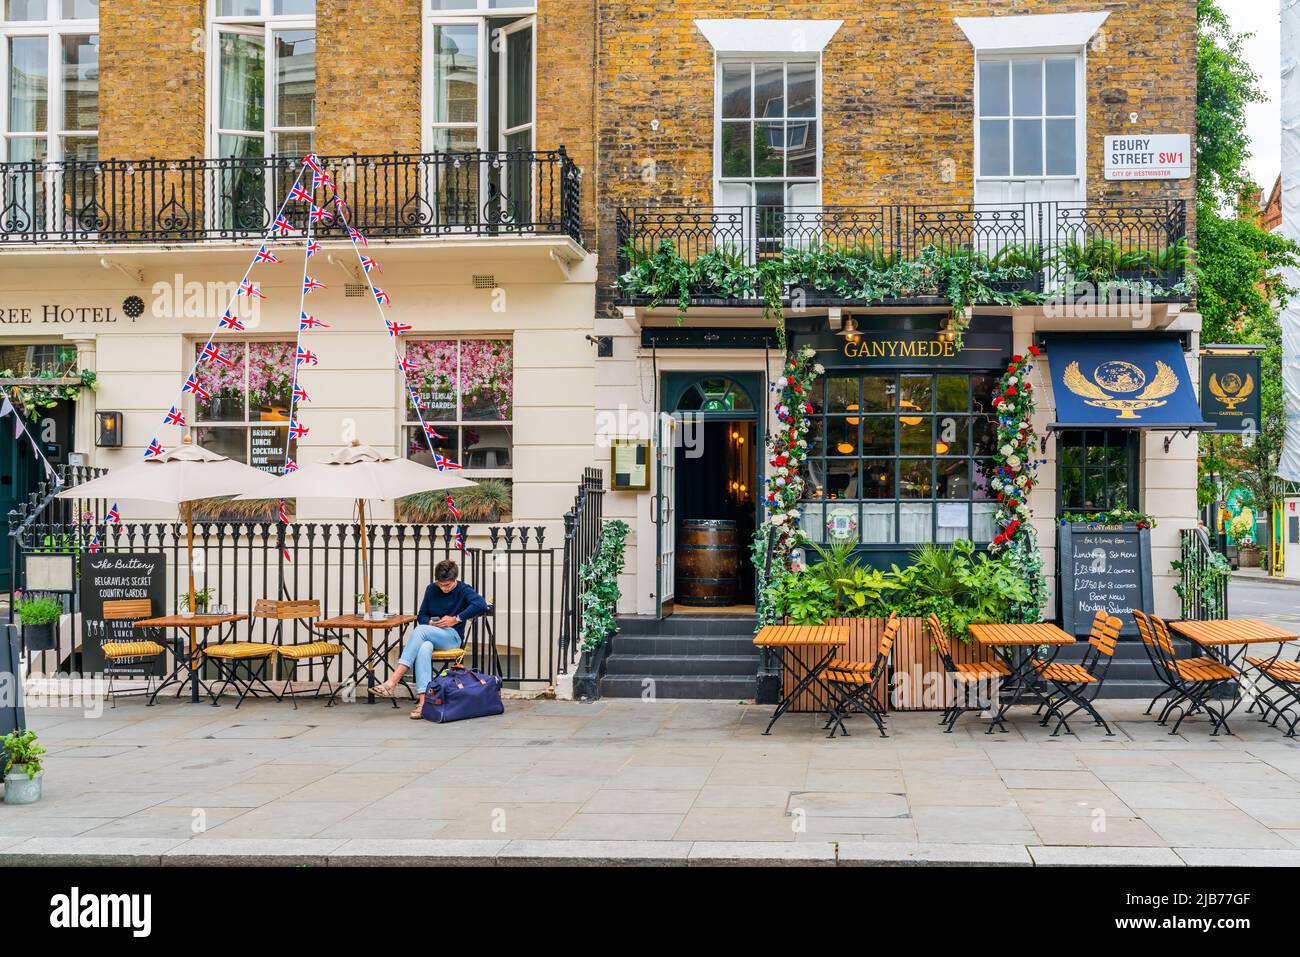 LONDON, UK - JUNE 03, 2022: Belgravia district in London is an affluent area known for the smart boutiques and high-end restaurants Stock Photo